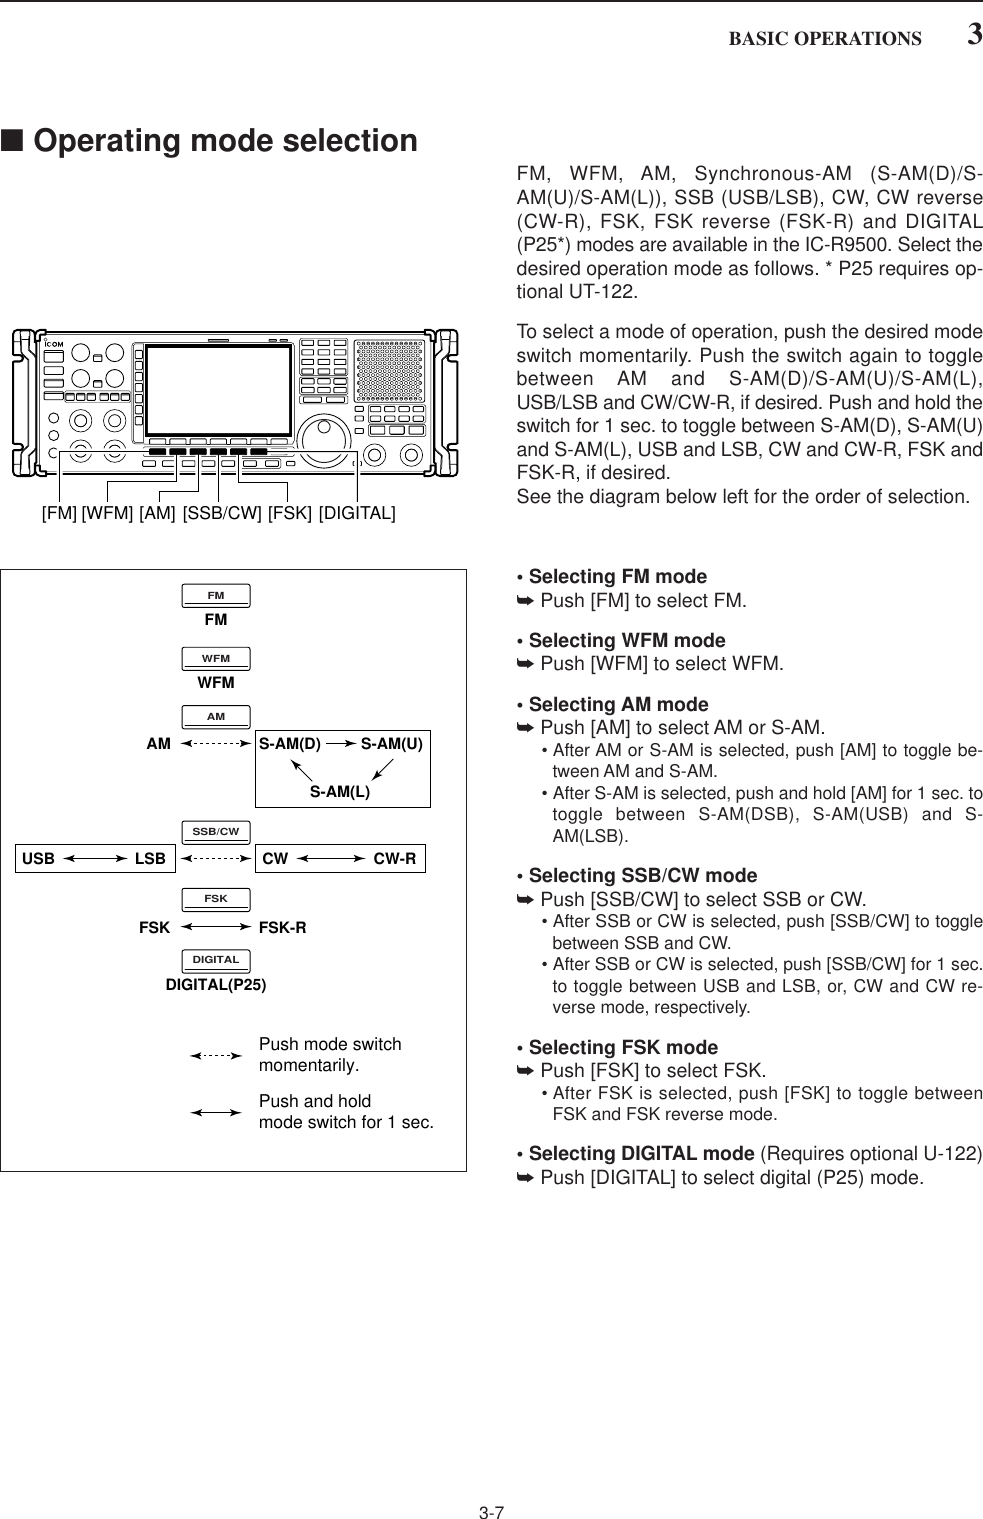 3-73BASIC OPERATIONS■Operating mode selectionFM, WFM, AM, Synchronous-AM (S-AM(D)/S-AM(U)/S-AM(L)), SSB (USB/LSB), CW, CW reverse(CW-R), FSK, FSK reverse (FSK-R) and DIGITAL(P25*) modes are available in the IC-R9500. Select thedesired operation mode as follows. * P25 requires op-tional UT-122.To select a mode of operation, push the desired modeswitch momentarily. Push the switch again to togglebetween AM and S-AM(D)/S-AM(U)/S-AM(L),USB/LSB and CW/CW-R, if desired. Push and hold theswitch for 1 sec. to toggle between S-AM(D), S-AM(U)and S-AM(L), USB and LSB, CW and CW-R, FSK andFSK-R, if desired. See the diagram below left for the order of selection.• Selecting FM mode➥Push [FM] to select FM.• Selecting WFM mode➥Push [WFM] to select WFM.• Selecting AM mode➥Push [AM] to select AM or S-AM.• After AM or S-AM is selected, push [AM] to toggle be-tween AM and S-AM.• After S-AM is selected, push and hold [AM] for 1 sec. totoggle between S-AM(DSB), S-AM(USB) and S-AM(LSB).• Selecting SSB/CW mode➥Push [SSB/CW] to select SSB or CW.• After SSB or CW is selected, push [SSB/CW] to togglebetween SSB and CW.• After SSB or CW is selected, push [SSB/CW] for 1 sec.to toggle between USB and LSB, or, CW and CW re-verse mode, respectively.• Selecting FSK mode➥Push [FSK] to select FSK.• After FSK is selected, push [FSK] to toggle betweenFSK and FSK reverse mode.• Selecting DIGITAL mode (Requires optional U-122)➥Push [DIGITAL] to select digital (P25) mode.Push and holdmode switch for 1 sec.Push mode switchmomentarily.USB LSB CW CW-RFSK FSK-RAMFMWFMDIGITAL(P25)S-AM(D) S-AM(U)S-AM(L)DIGITALFSKSSB/CWWFMAMFM[FM] [WFM] [AM] [SSB/CW] [FSK] [DIGITAL]